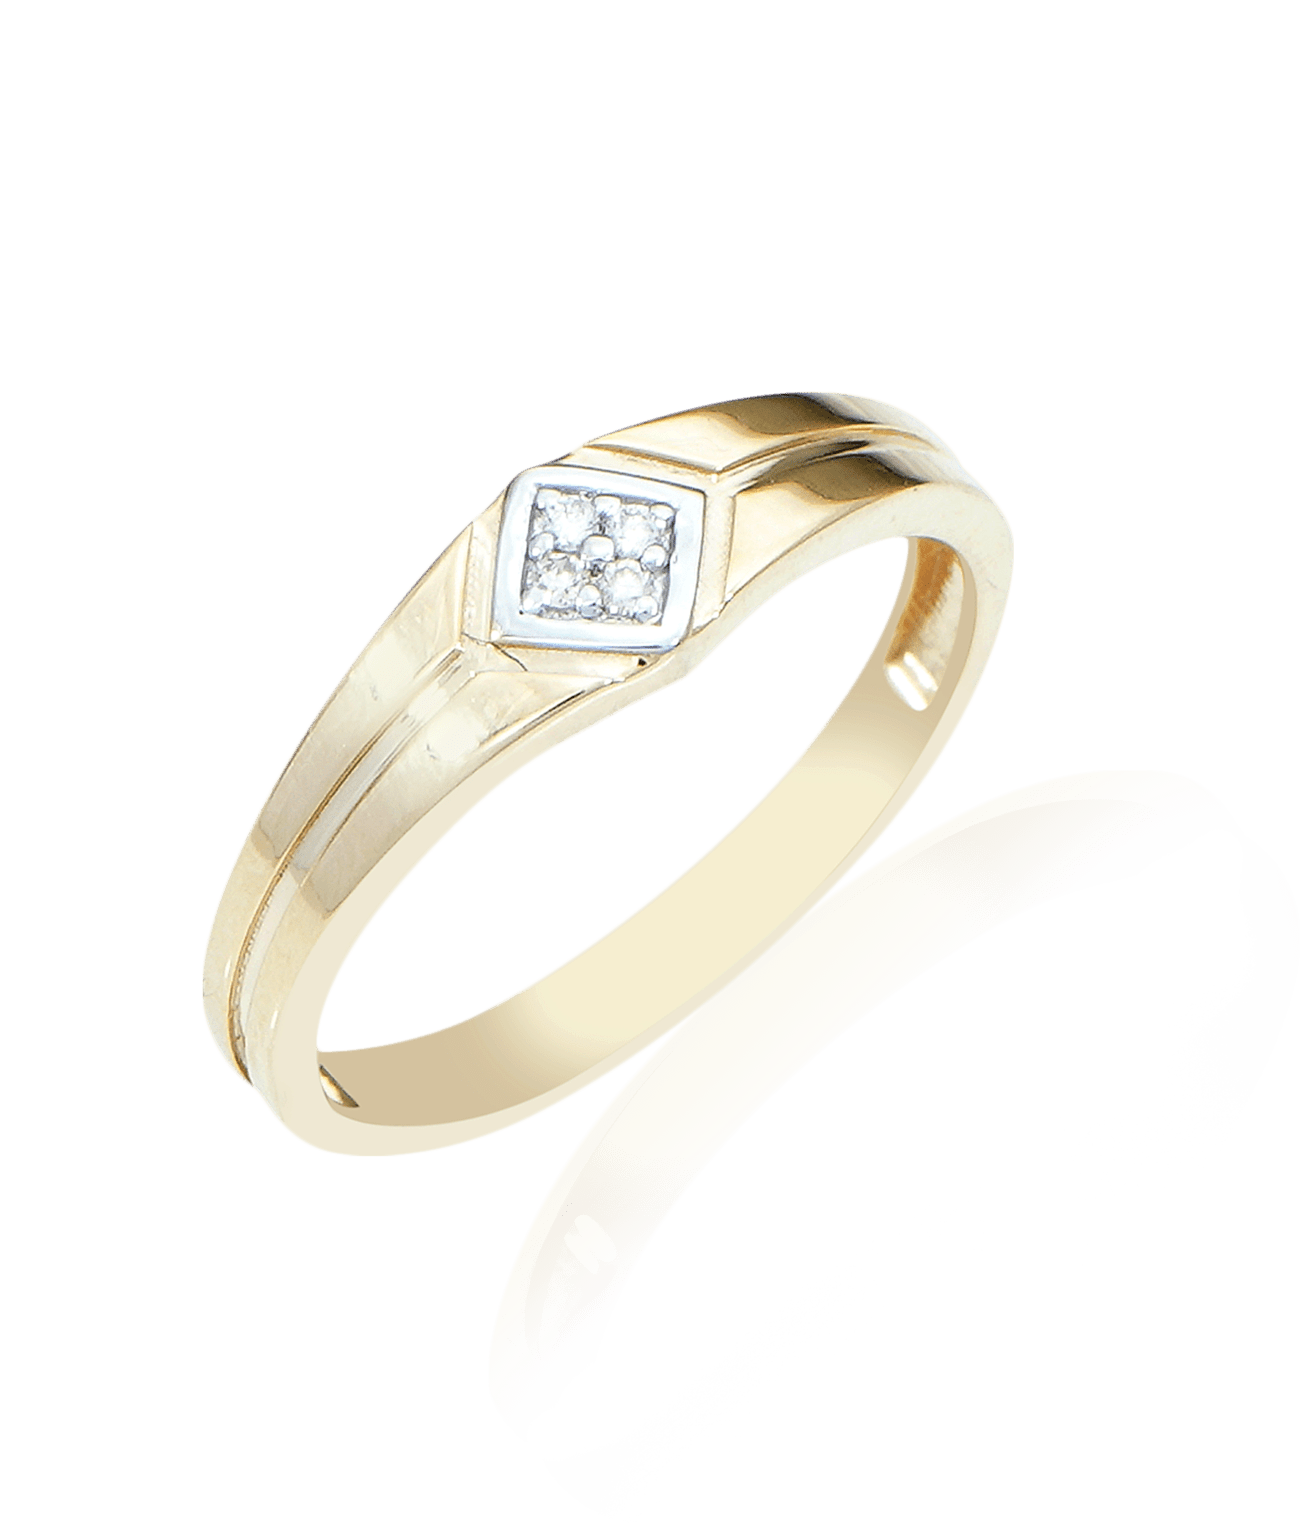 Manufacturer of 22kt gold men's classic single stone ring msr106 | Jewelxy  - 179845